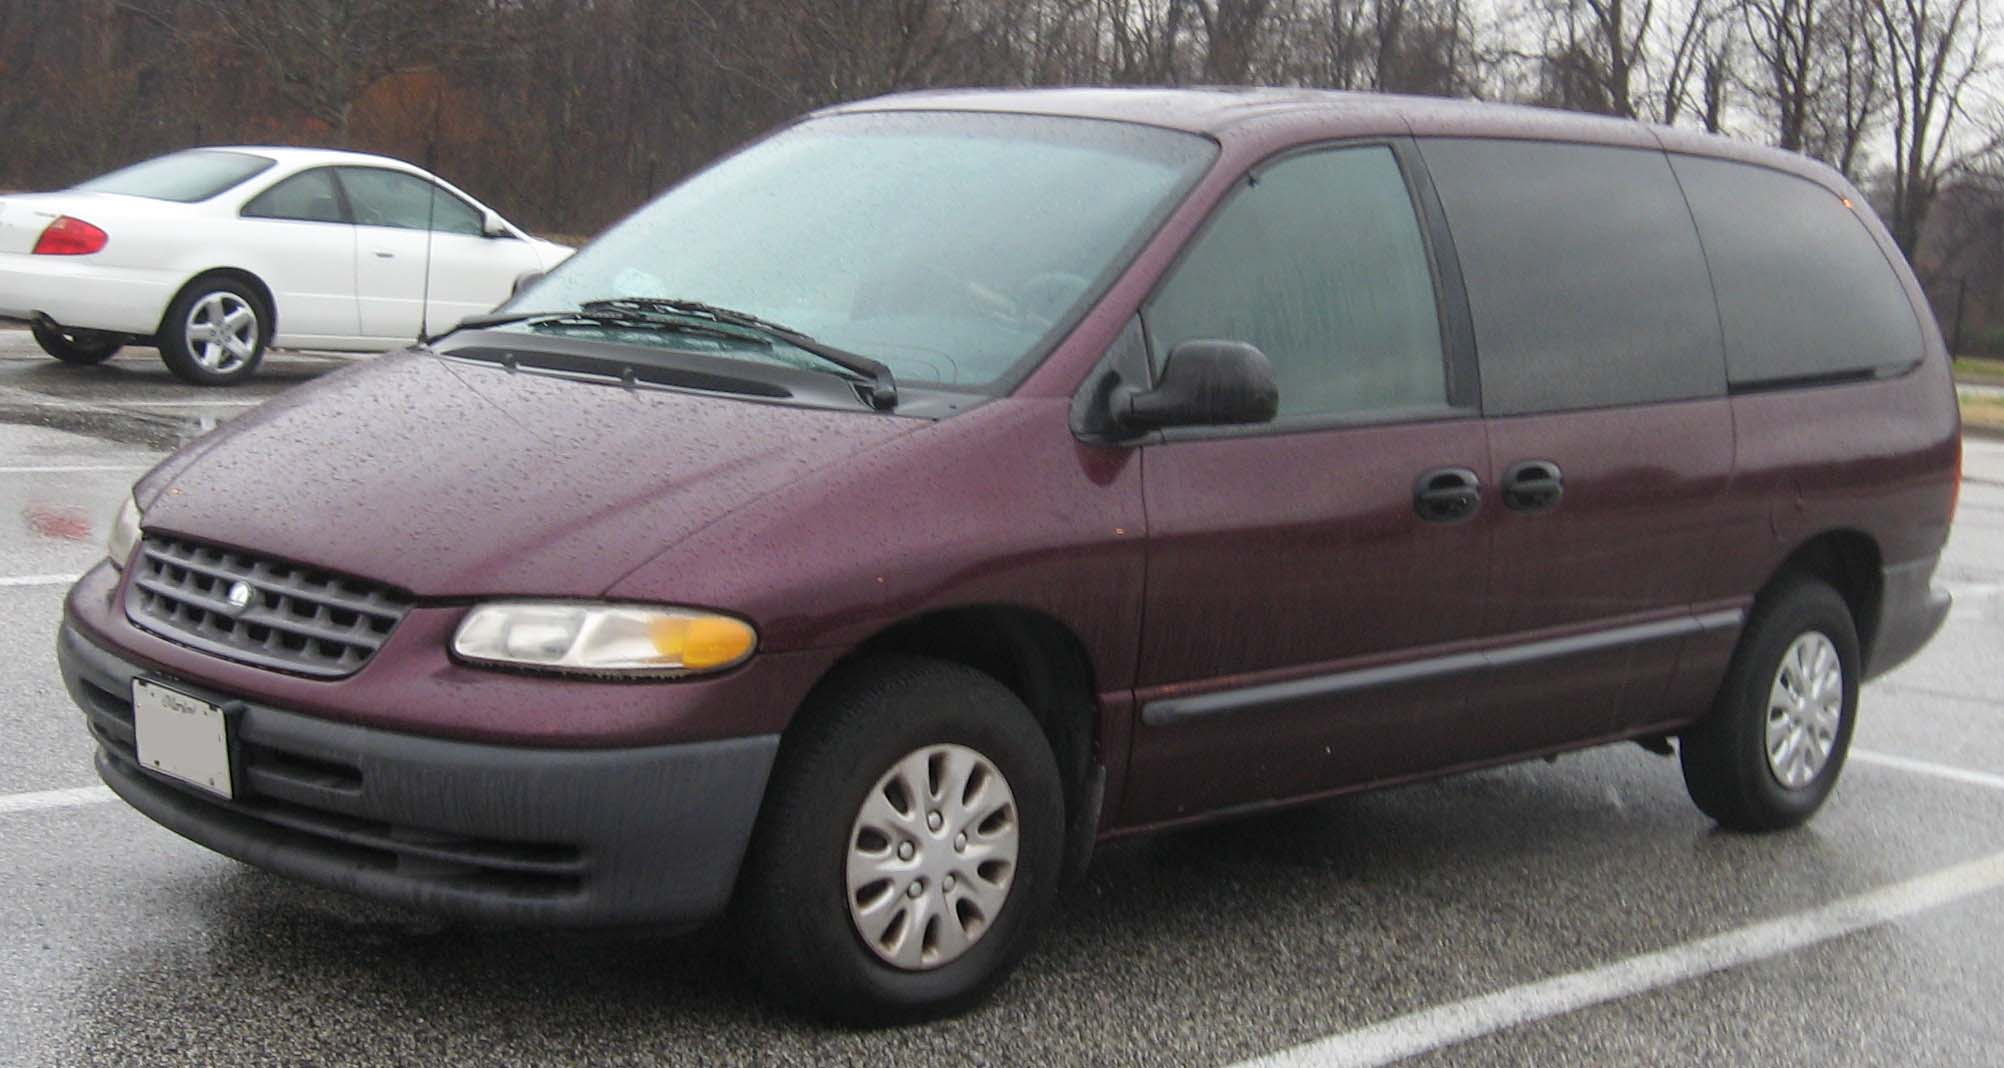 1996 plymouth voyager 3.0 oil type